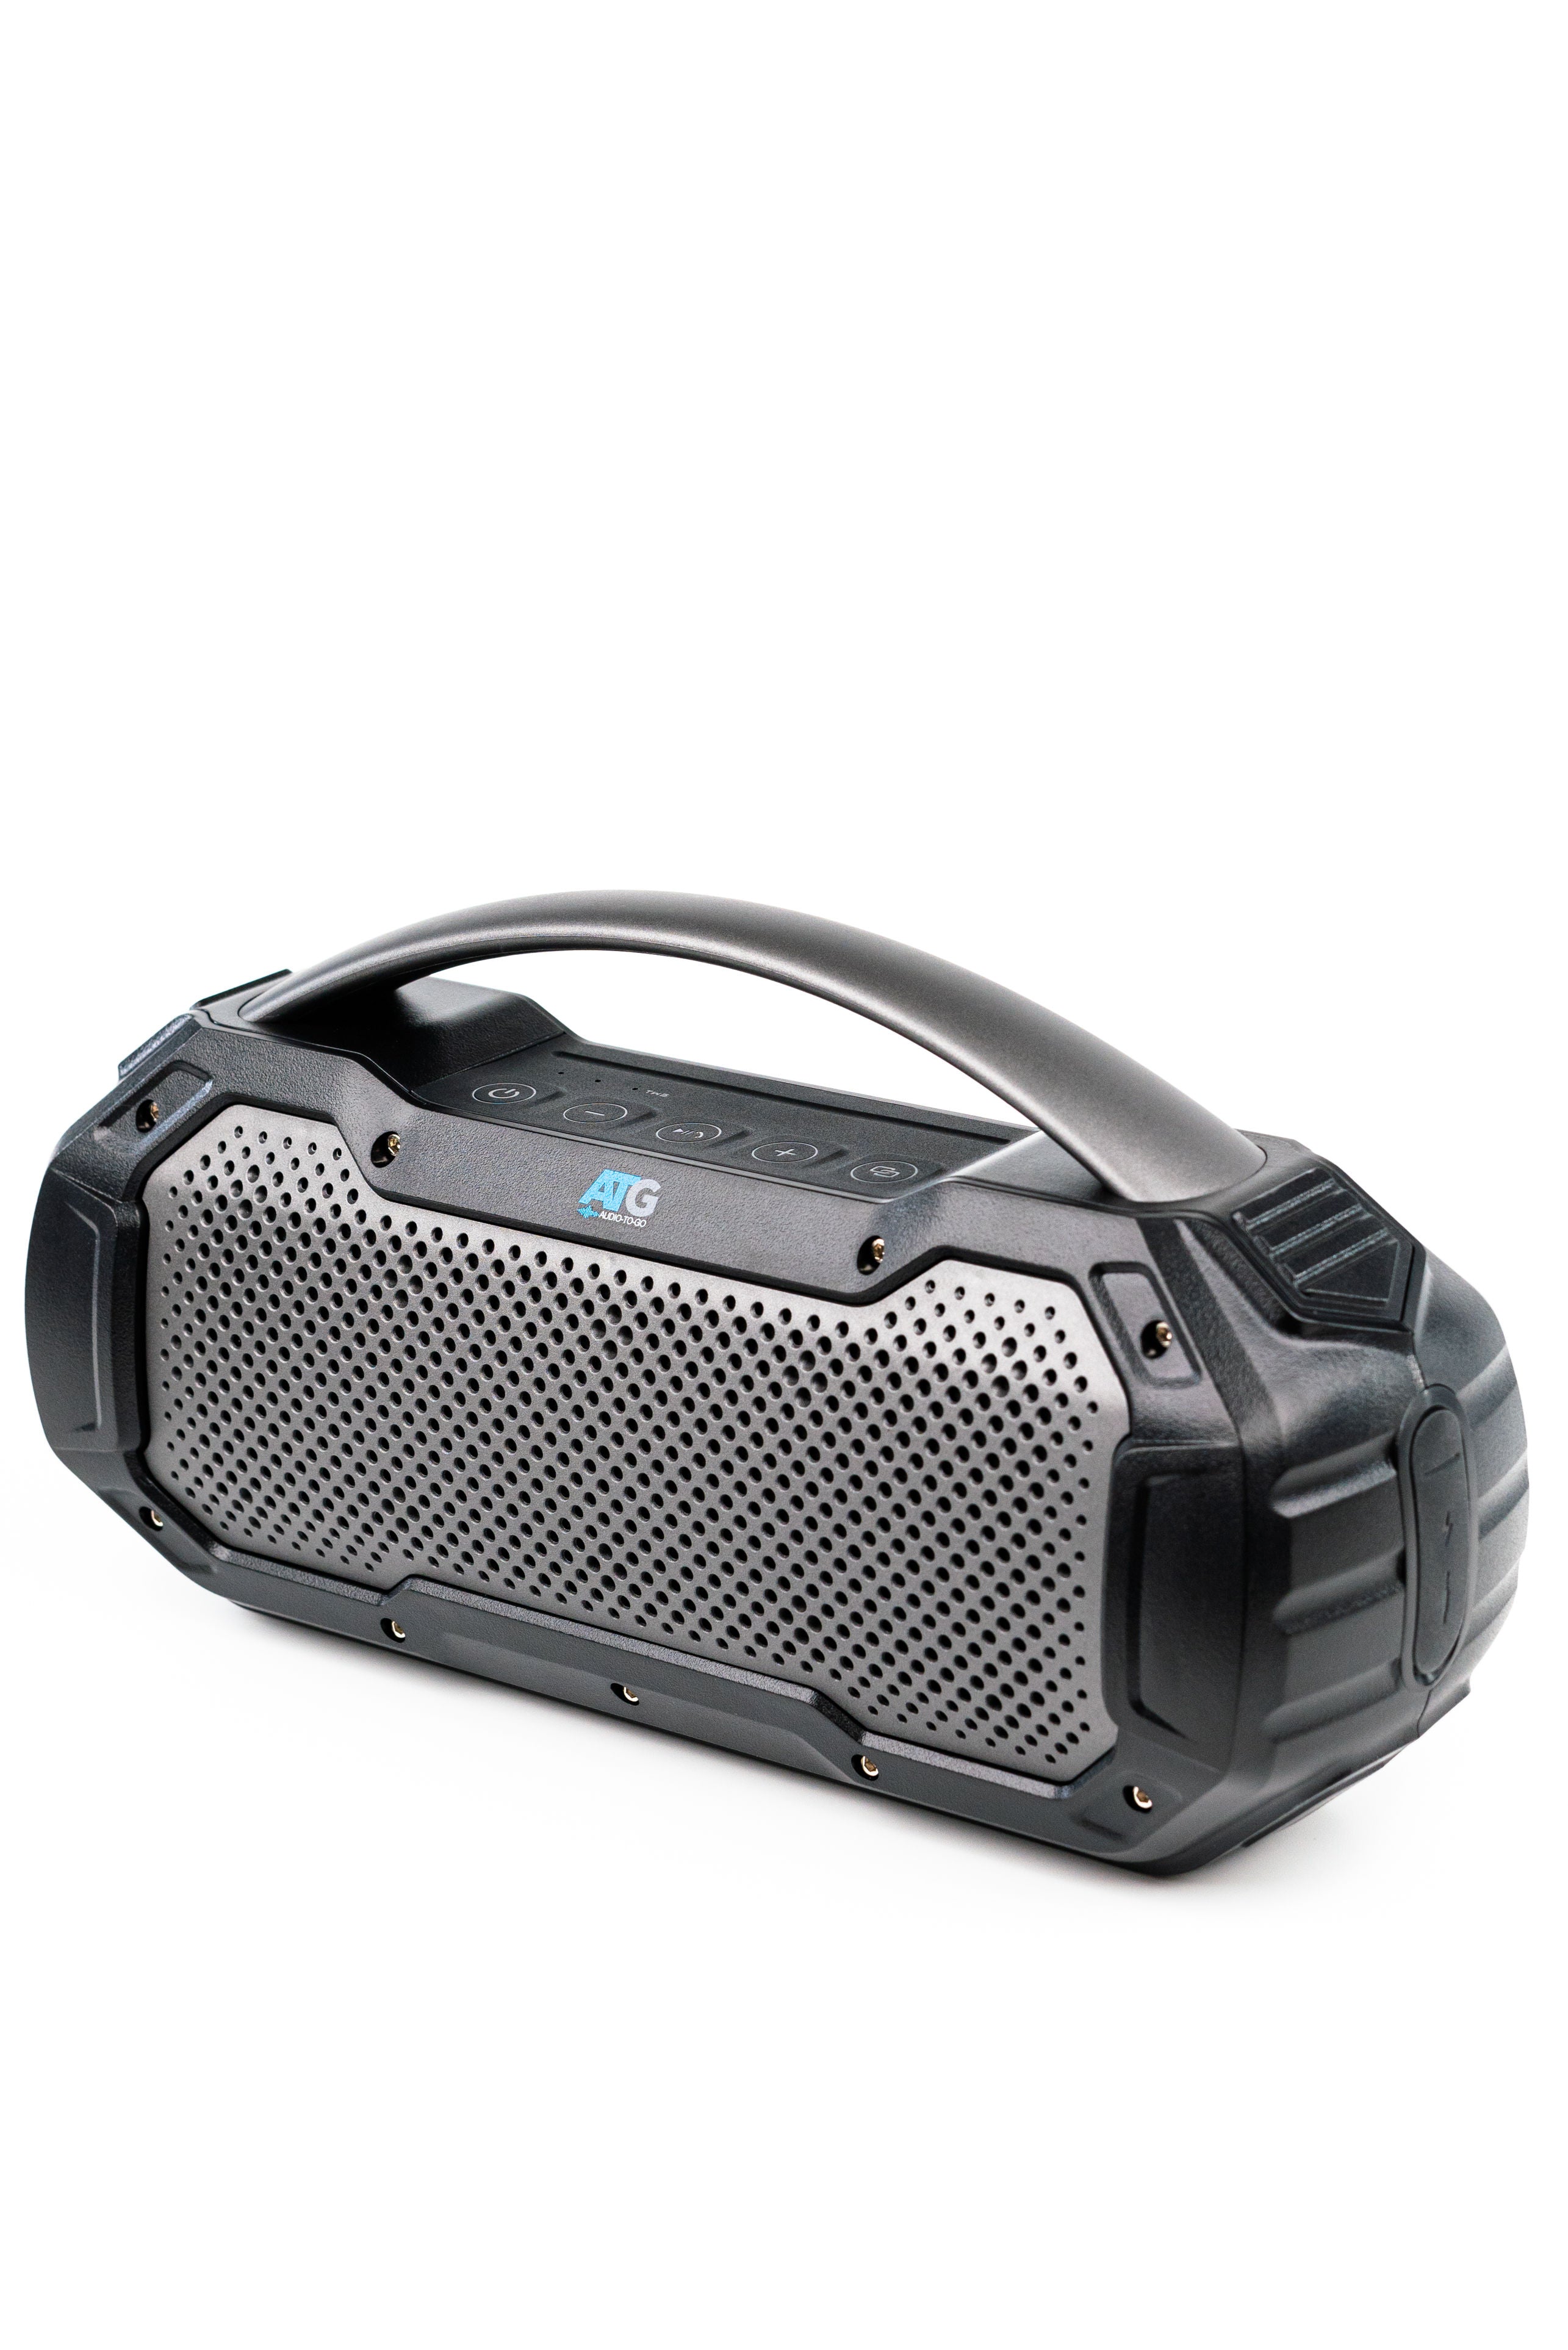 ATG SYDKIK-L - IPX6 Water-Proof Bluetooth 5.0 Speaker with TWS Function